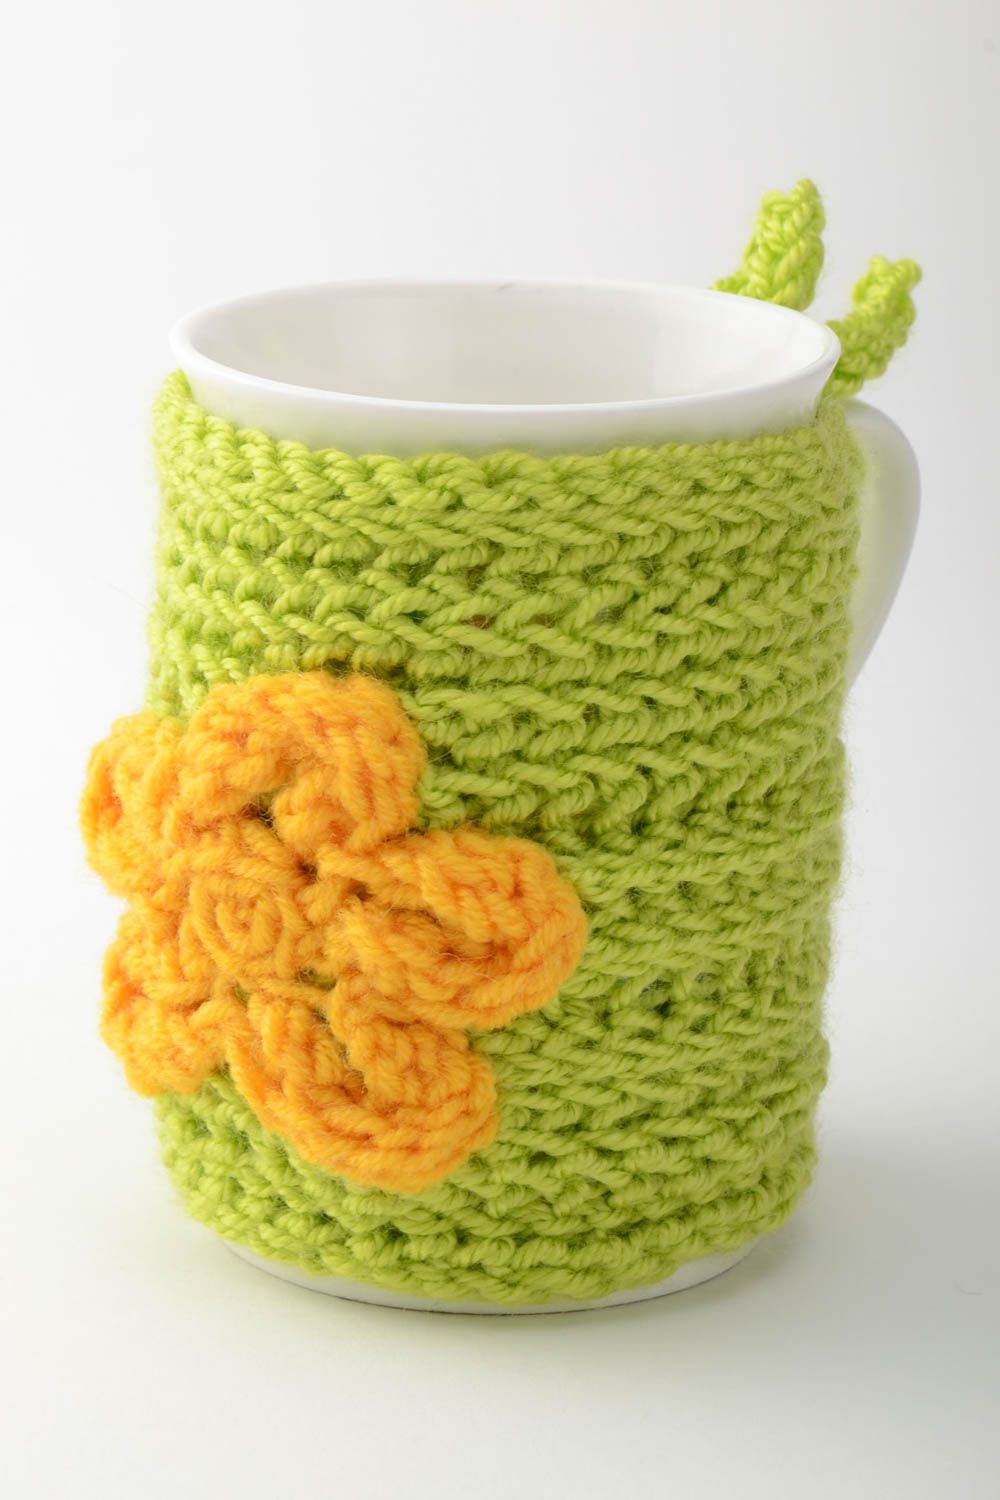 10 oz ceramic teacup with knitted cover can be personalized 0,53 lb photo 5